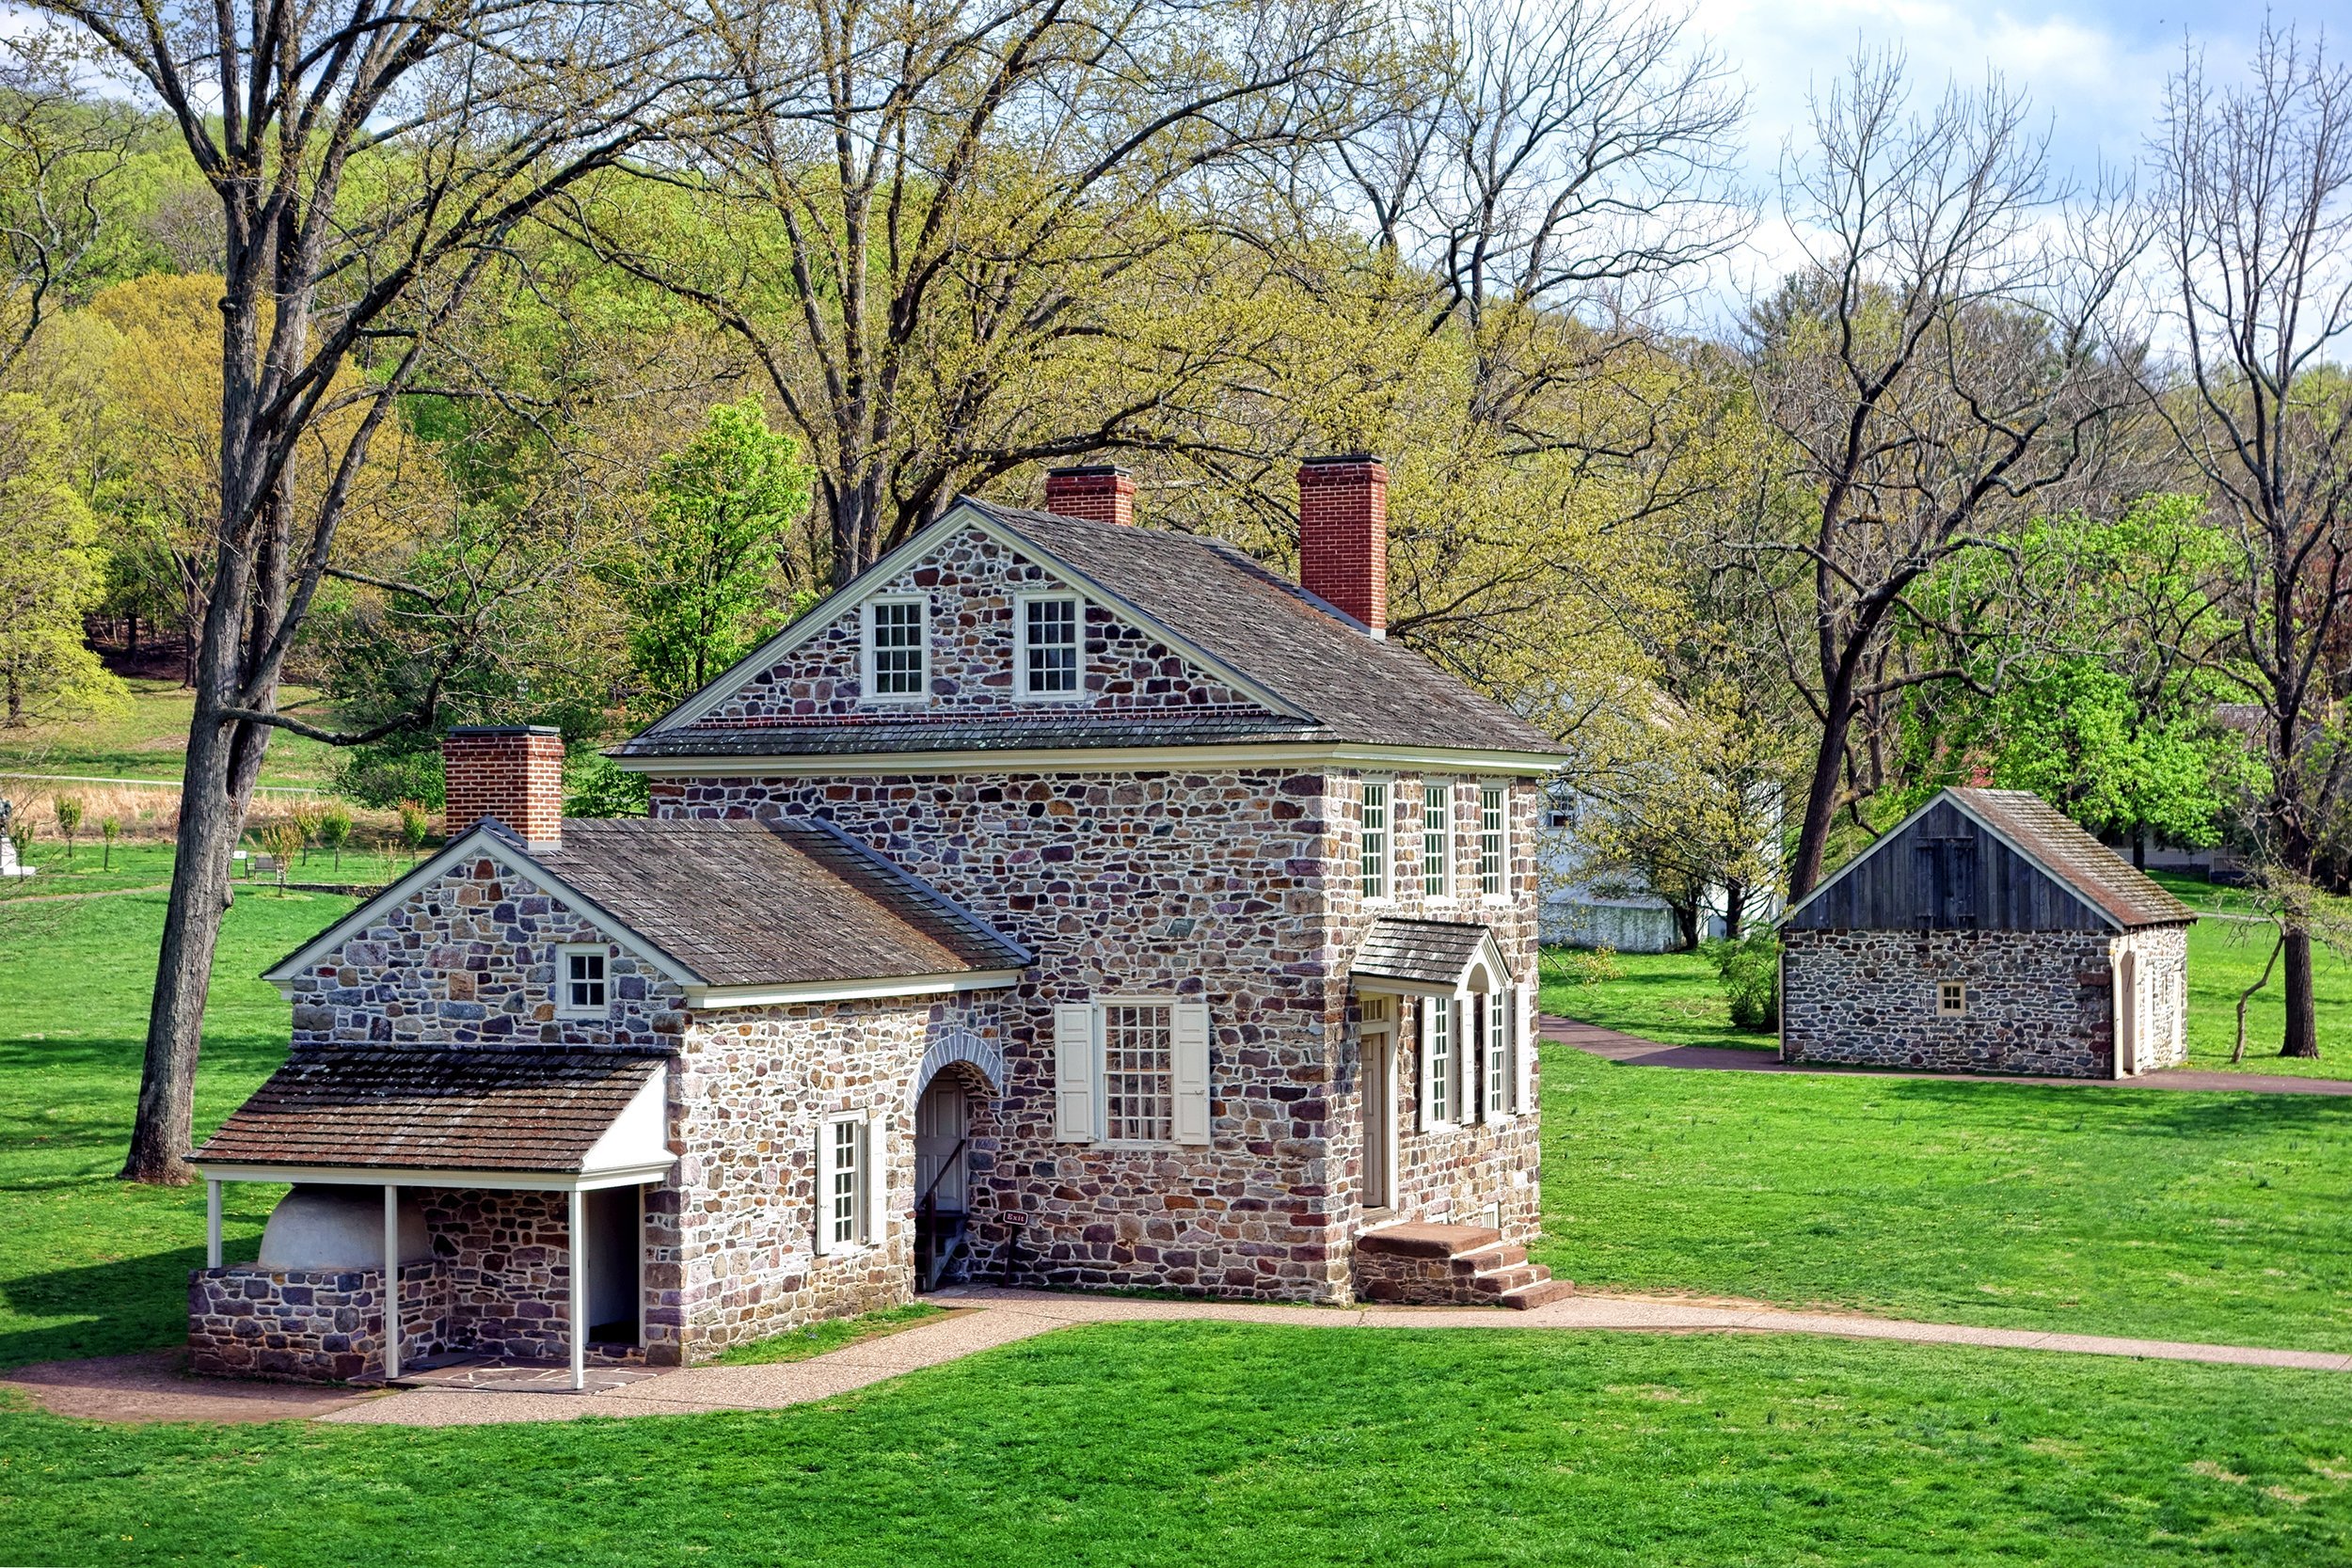 <p>From the winter of 1777 to the summer of 1778, <a href="https://www.nps.gov/vafo/index.htm">Valley Forge</a> was the Continental Army's encampment site in the Revolutionary War. Attractions include a visitor center, a museum, memorials, and a restored headquarters building used by George Washington; Washington's headquarters is closed due to flood damage.</p><p><b>Related:</b> <a href="https://blog.cheapism.com/historic-sites-virtual-tours/">Historic Places Across America That You Can Tour Virtually</a></p>